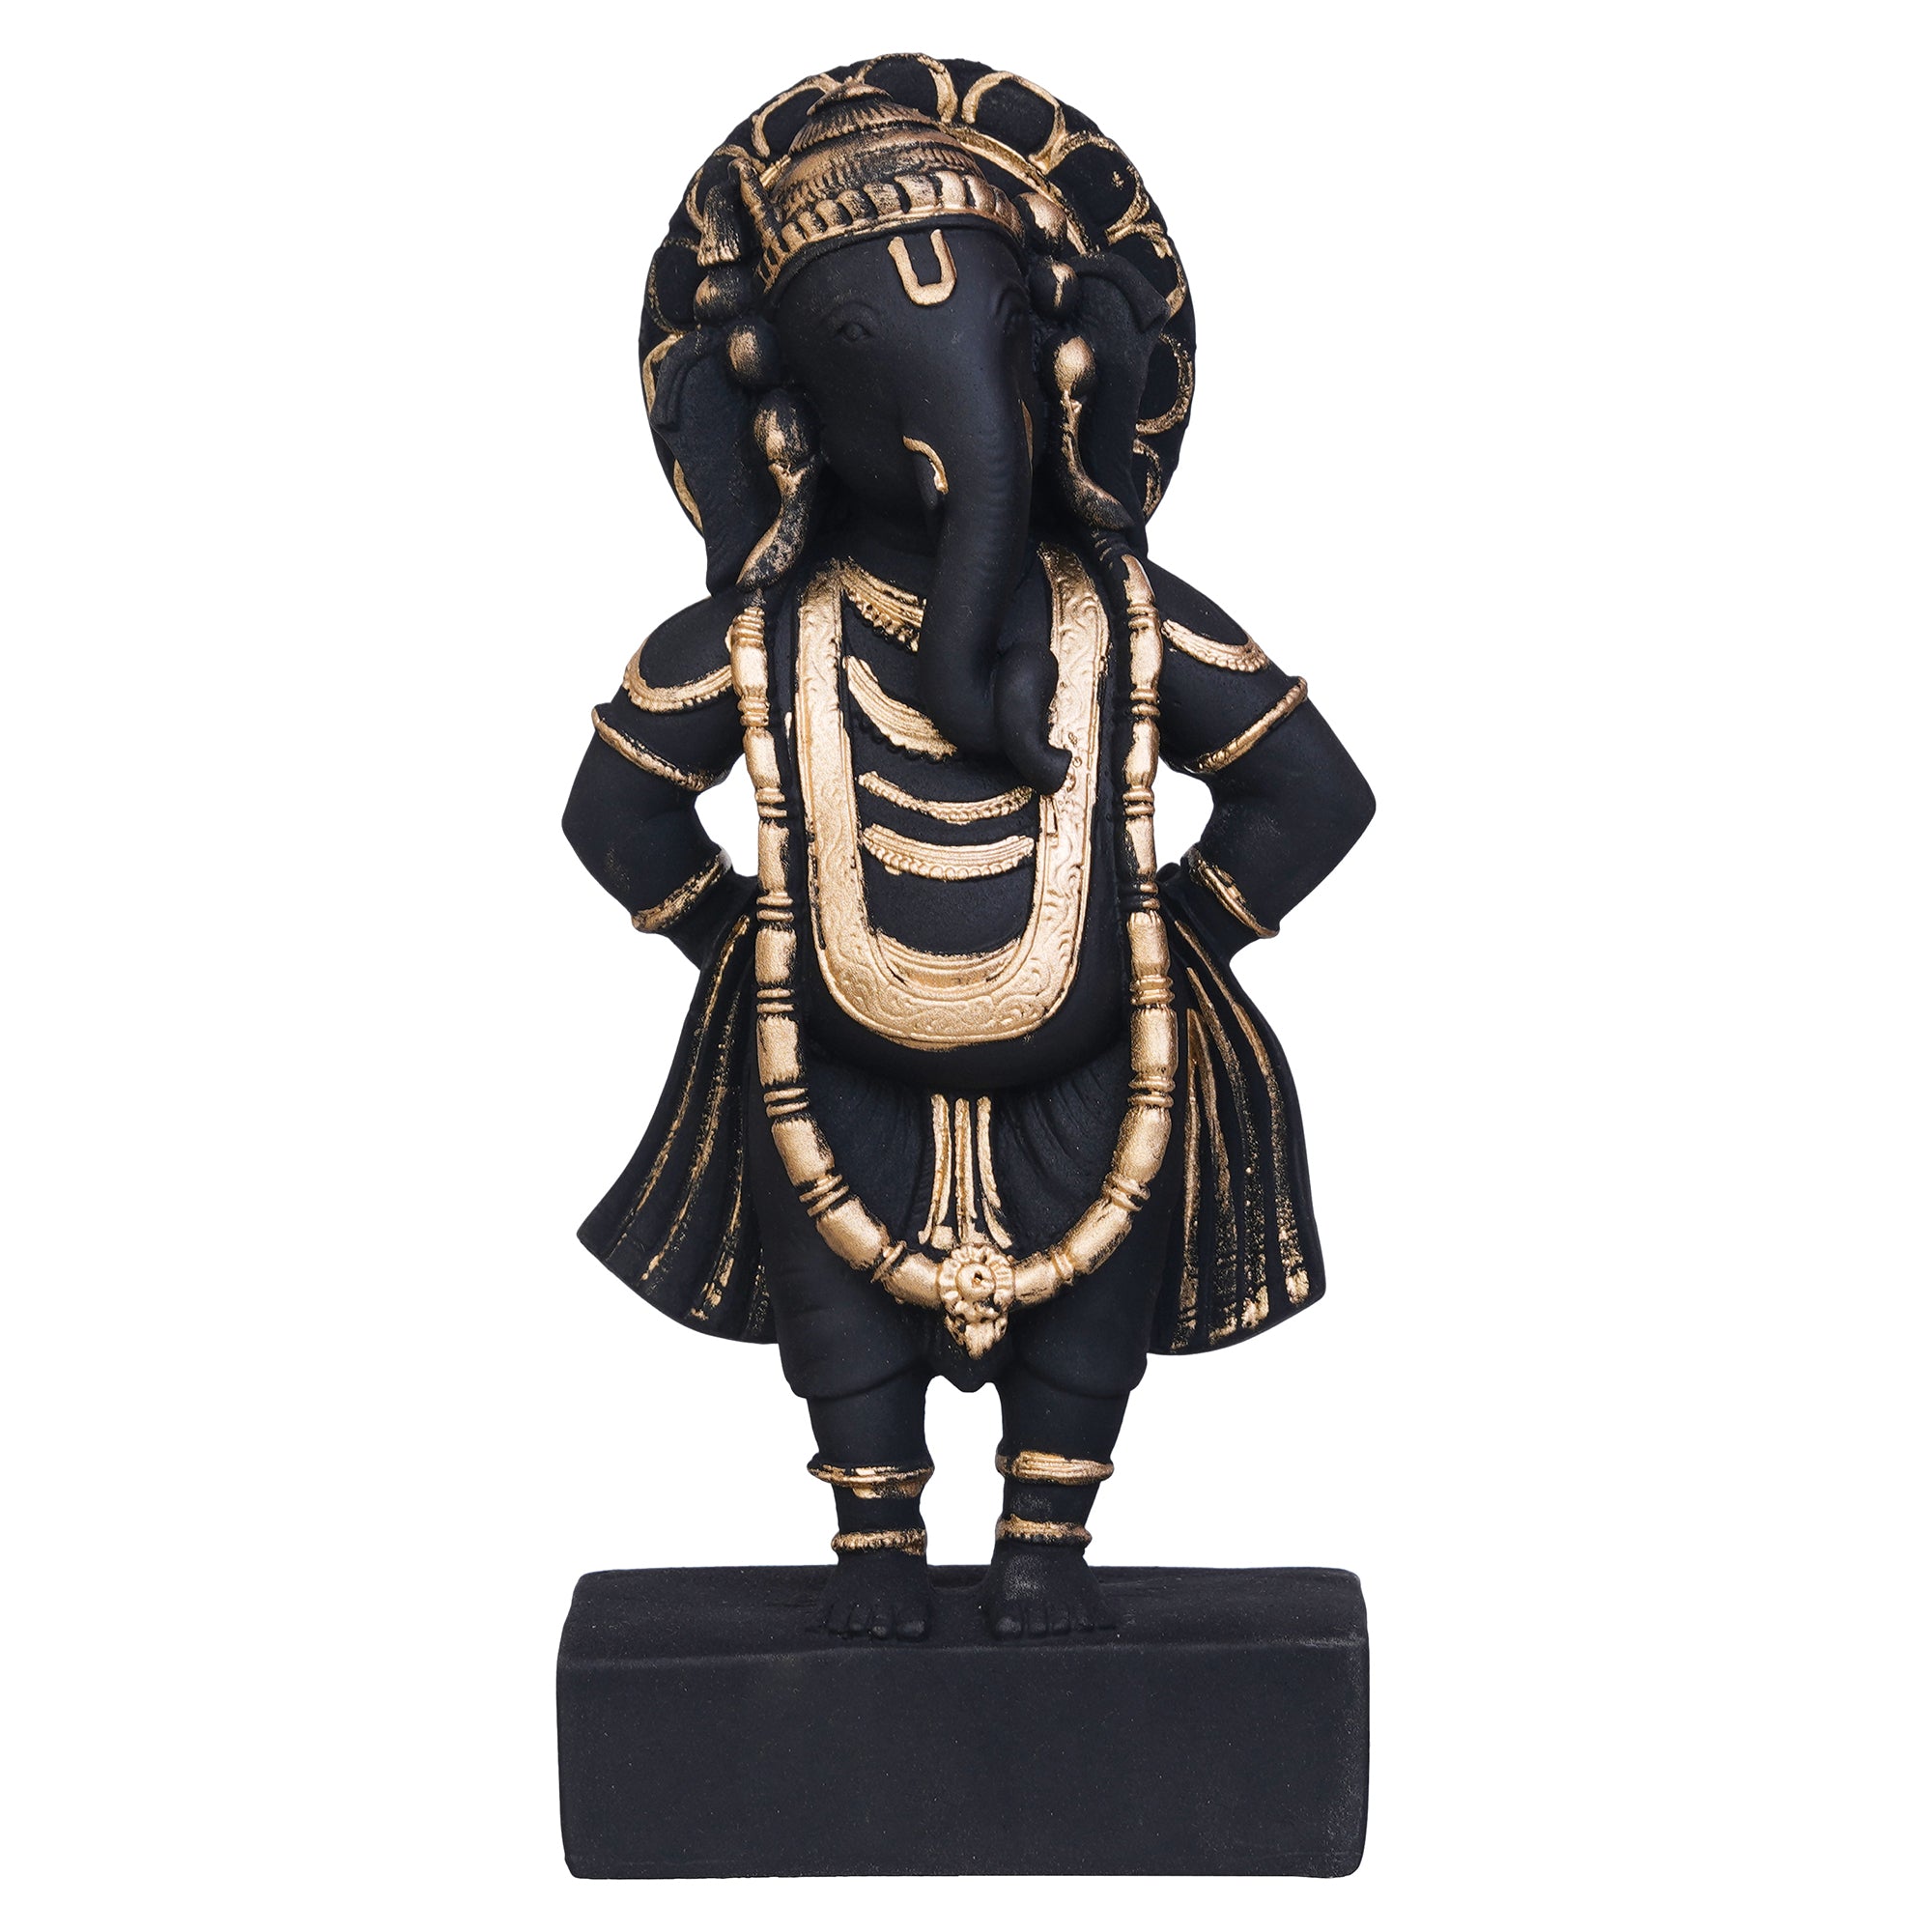 Black & Golden Polyresin Handcrafted Standing Lord Ganesha Statue 2